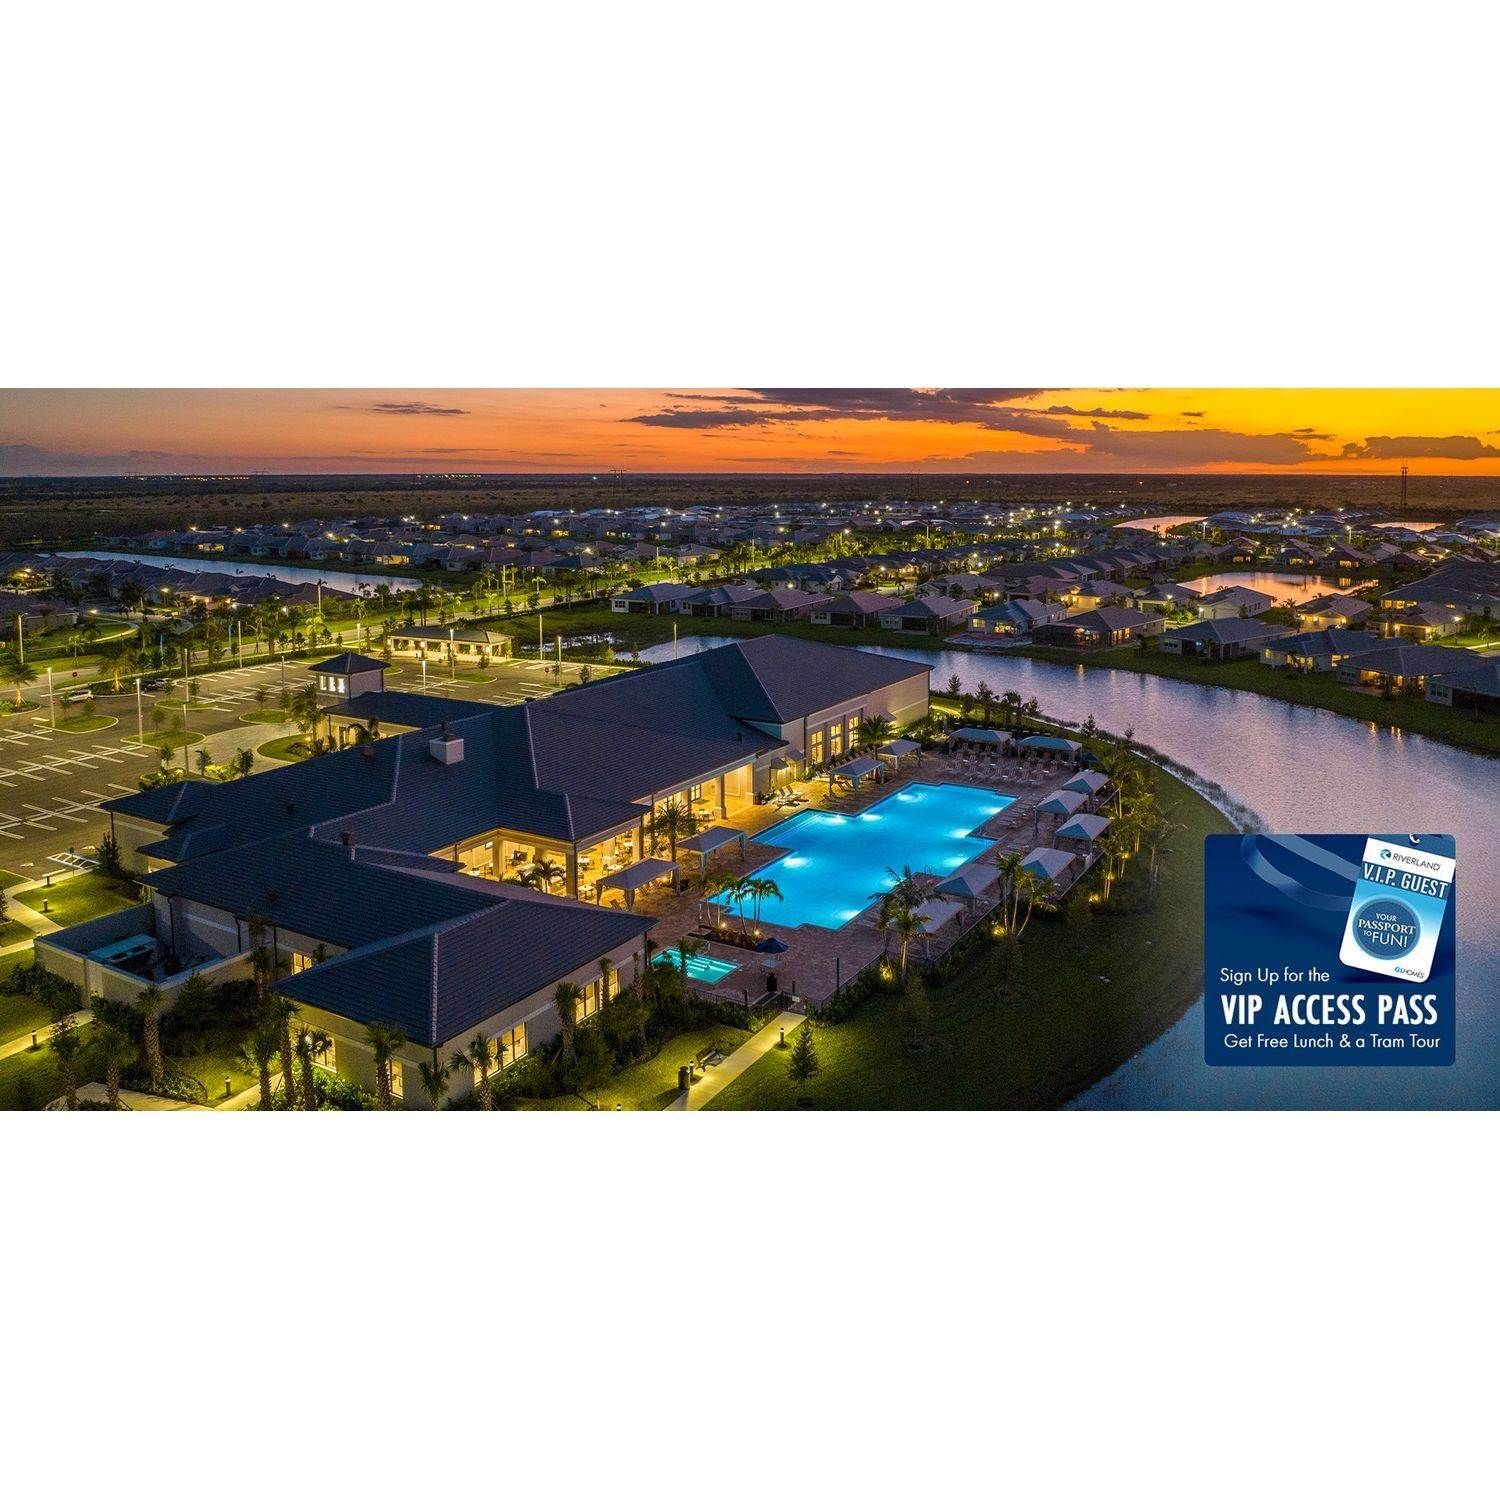 2. Valencia Walk at Riverland® xây dựng tại 10735 SW Matisse Lane, Port St. Lucie, FL 34987